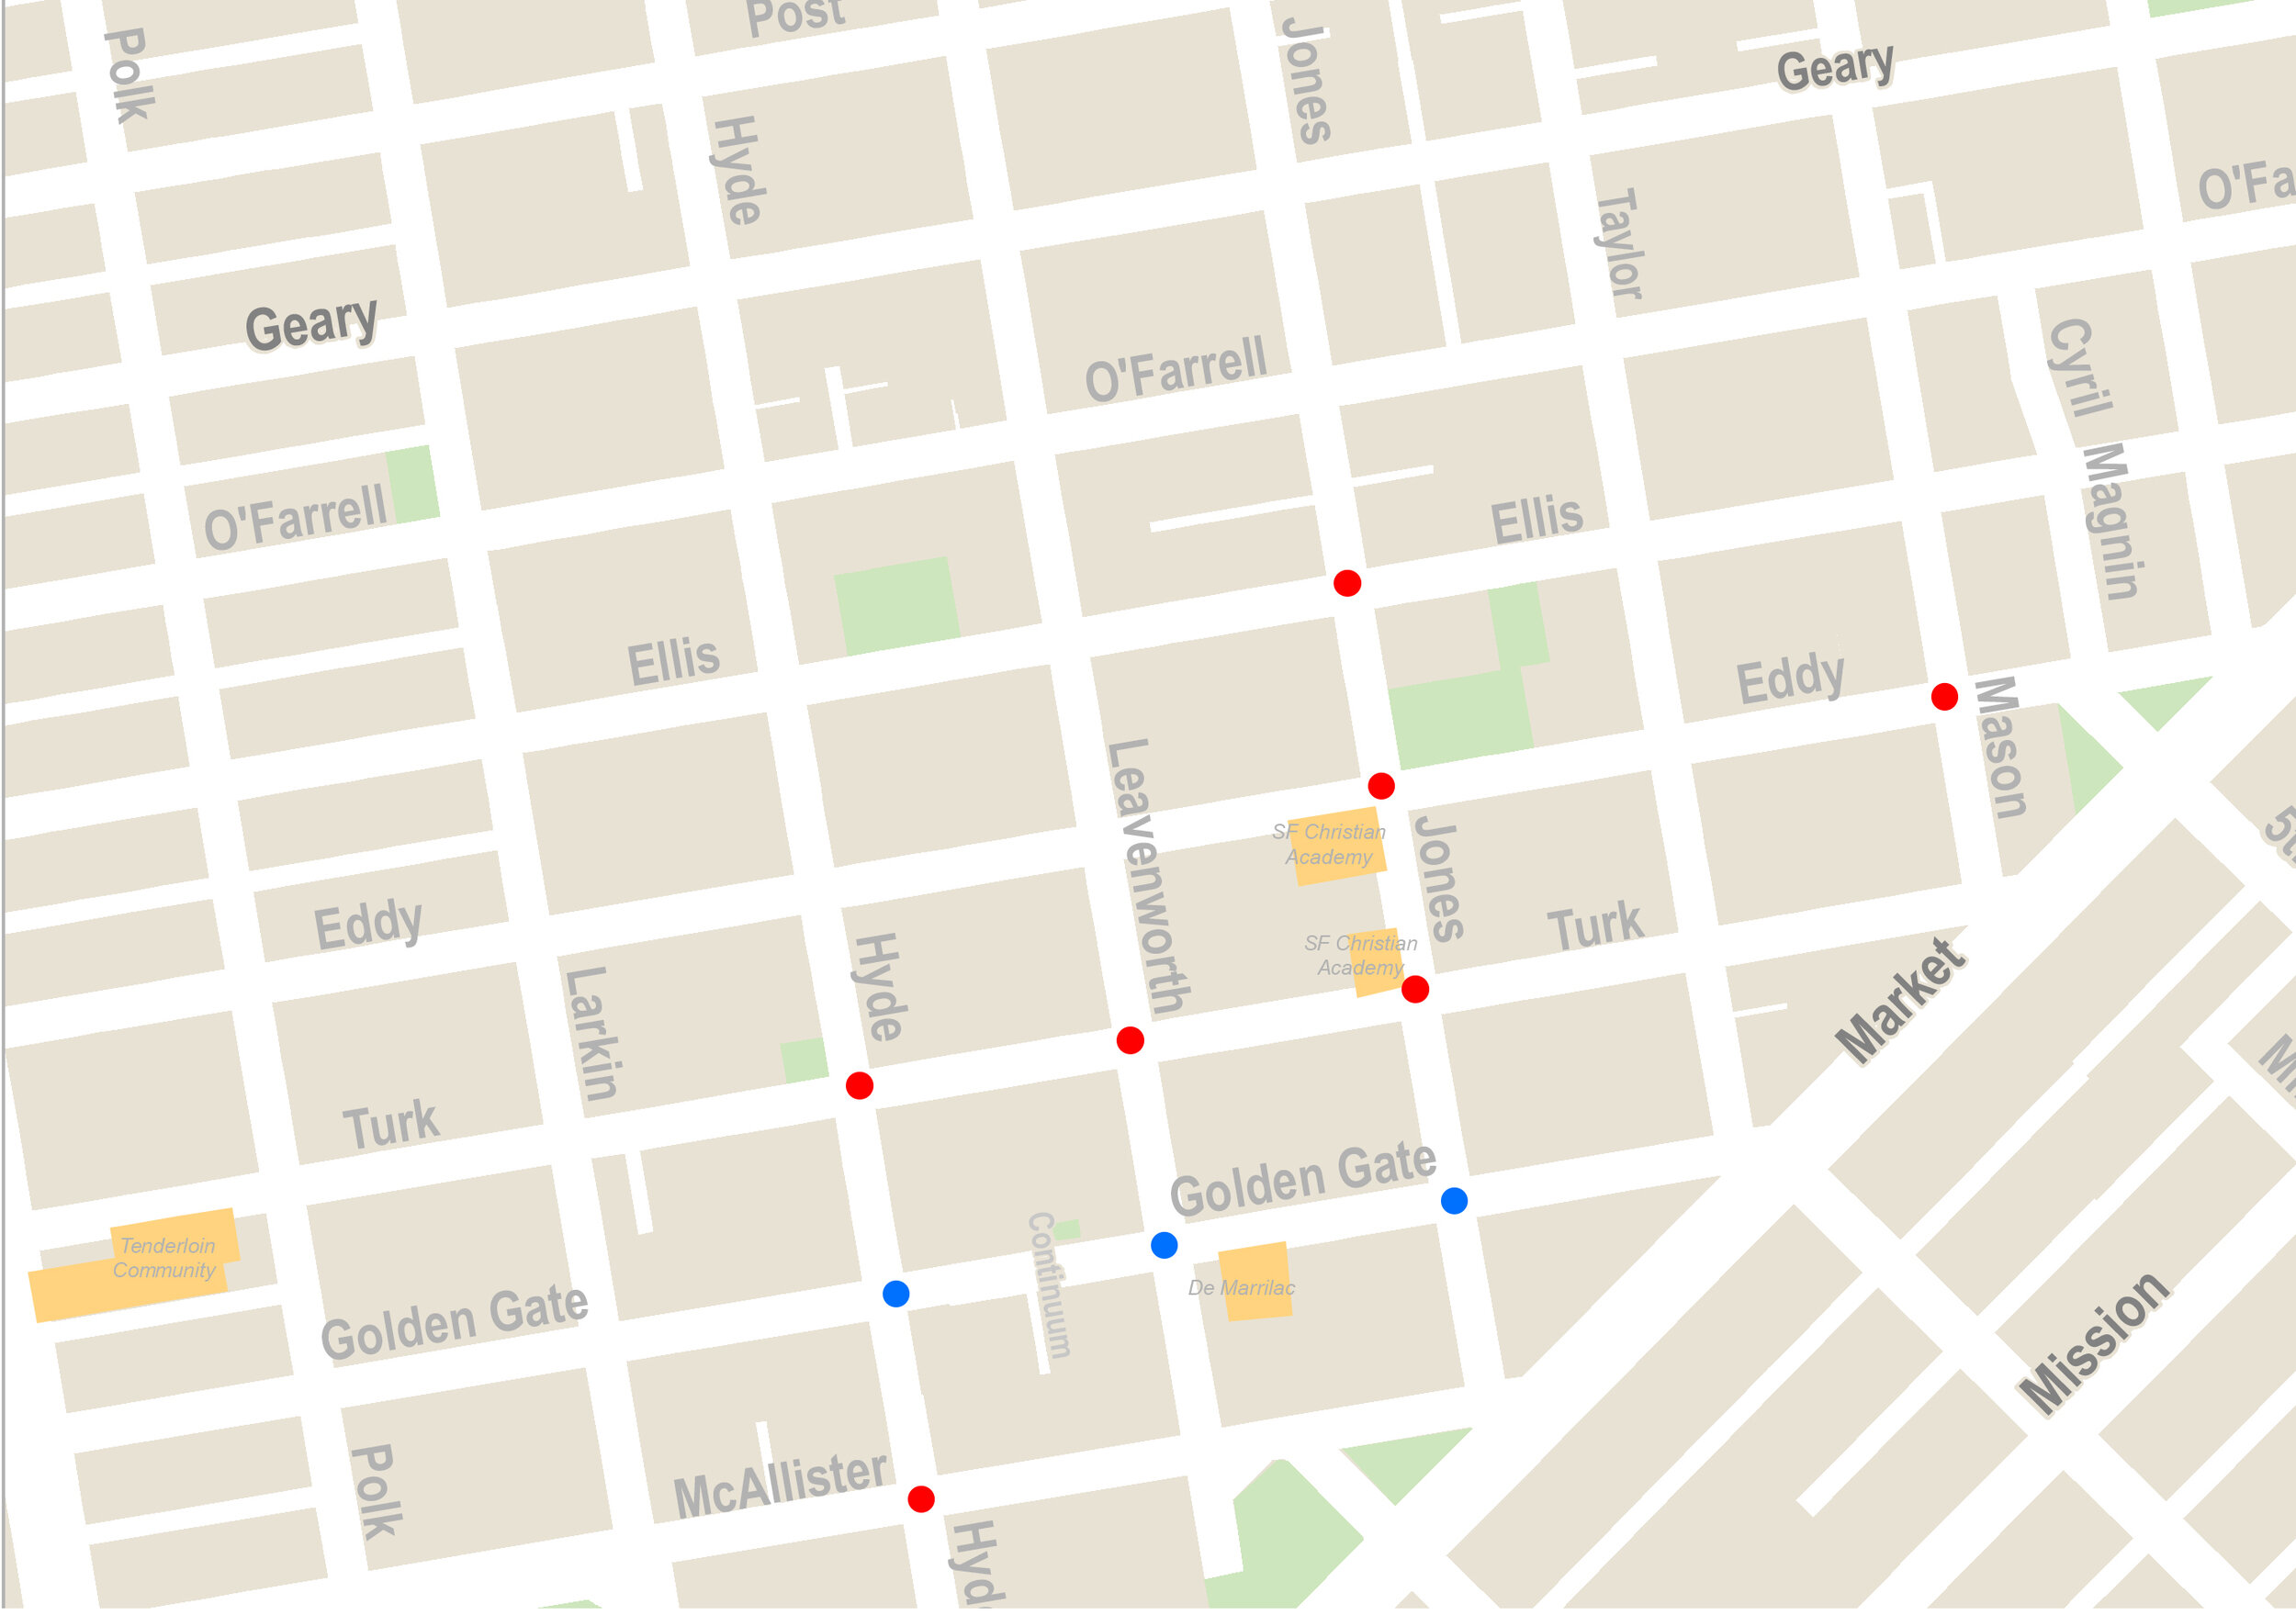 Oct 2019 -SFMTA map of implemented intersection changes